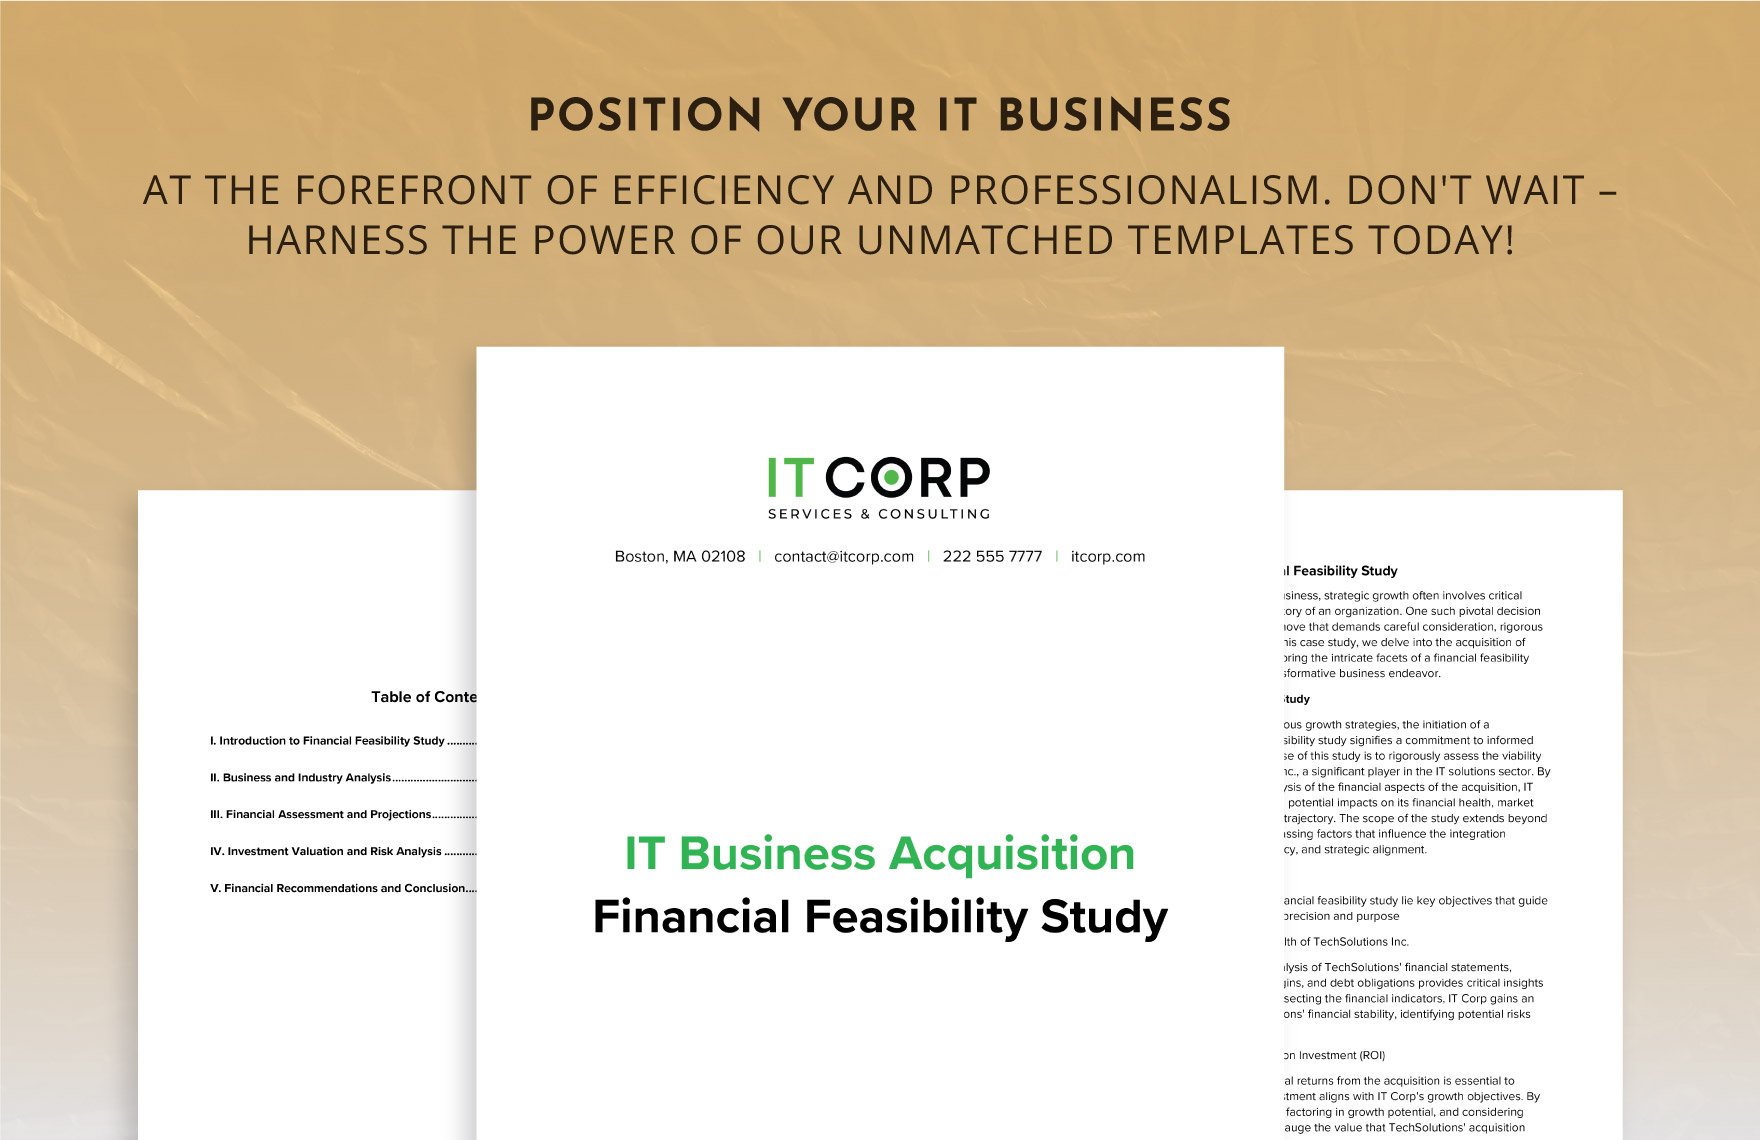 IT Business Acquisition Financial Feasibility Study Template